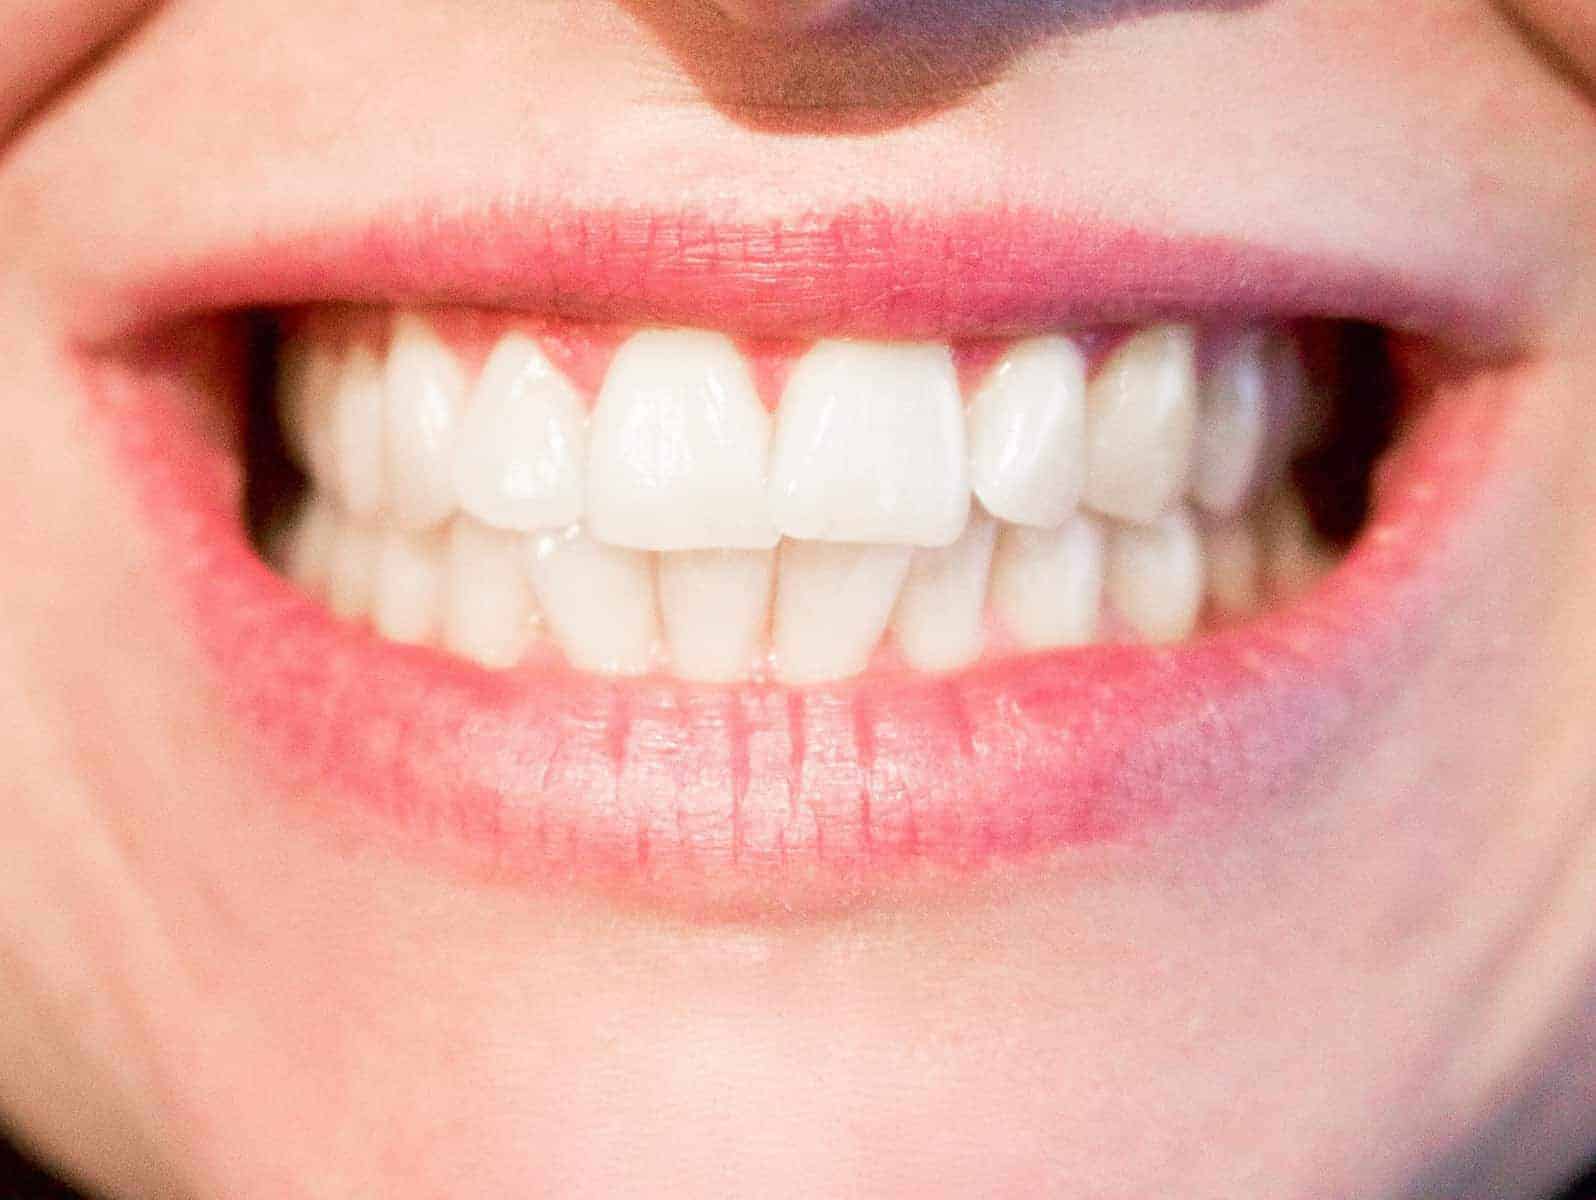 Some Obvious And Not-so-obvious Diet Tips To Keep Your Teeth Healthy